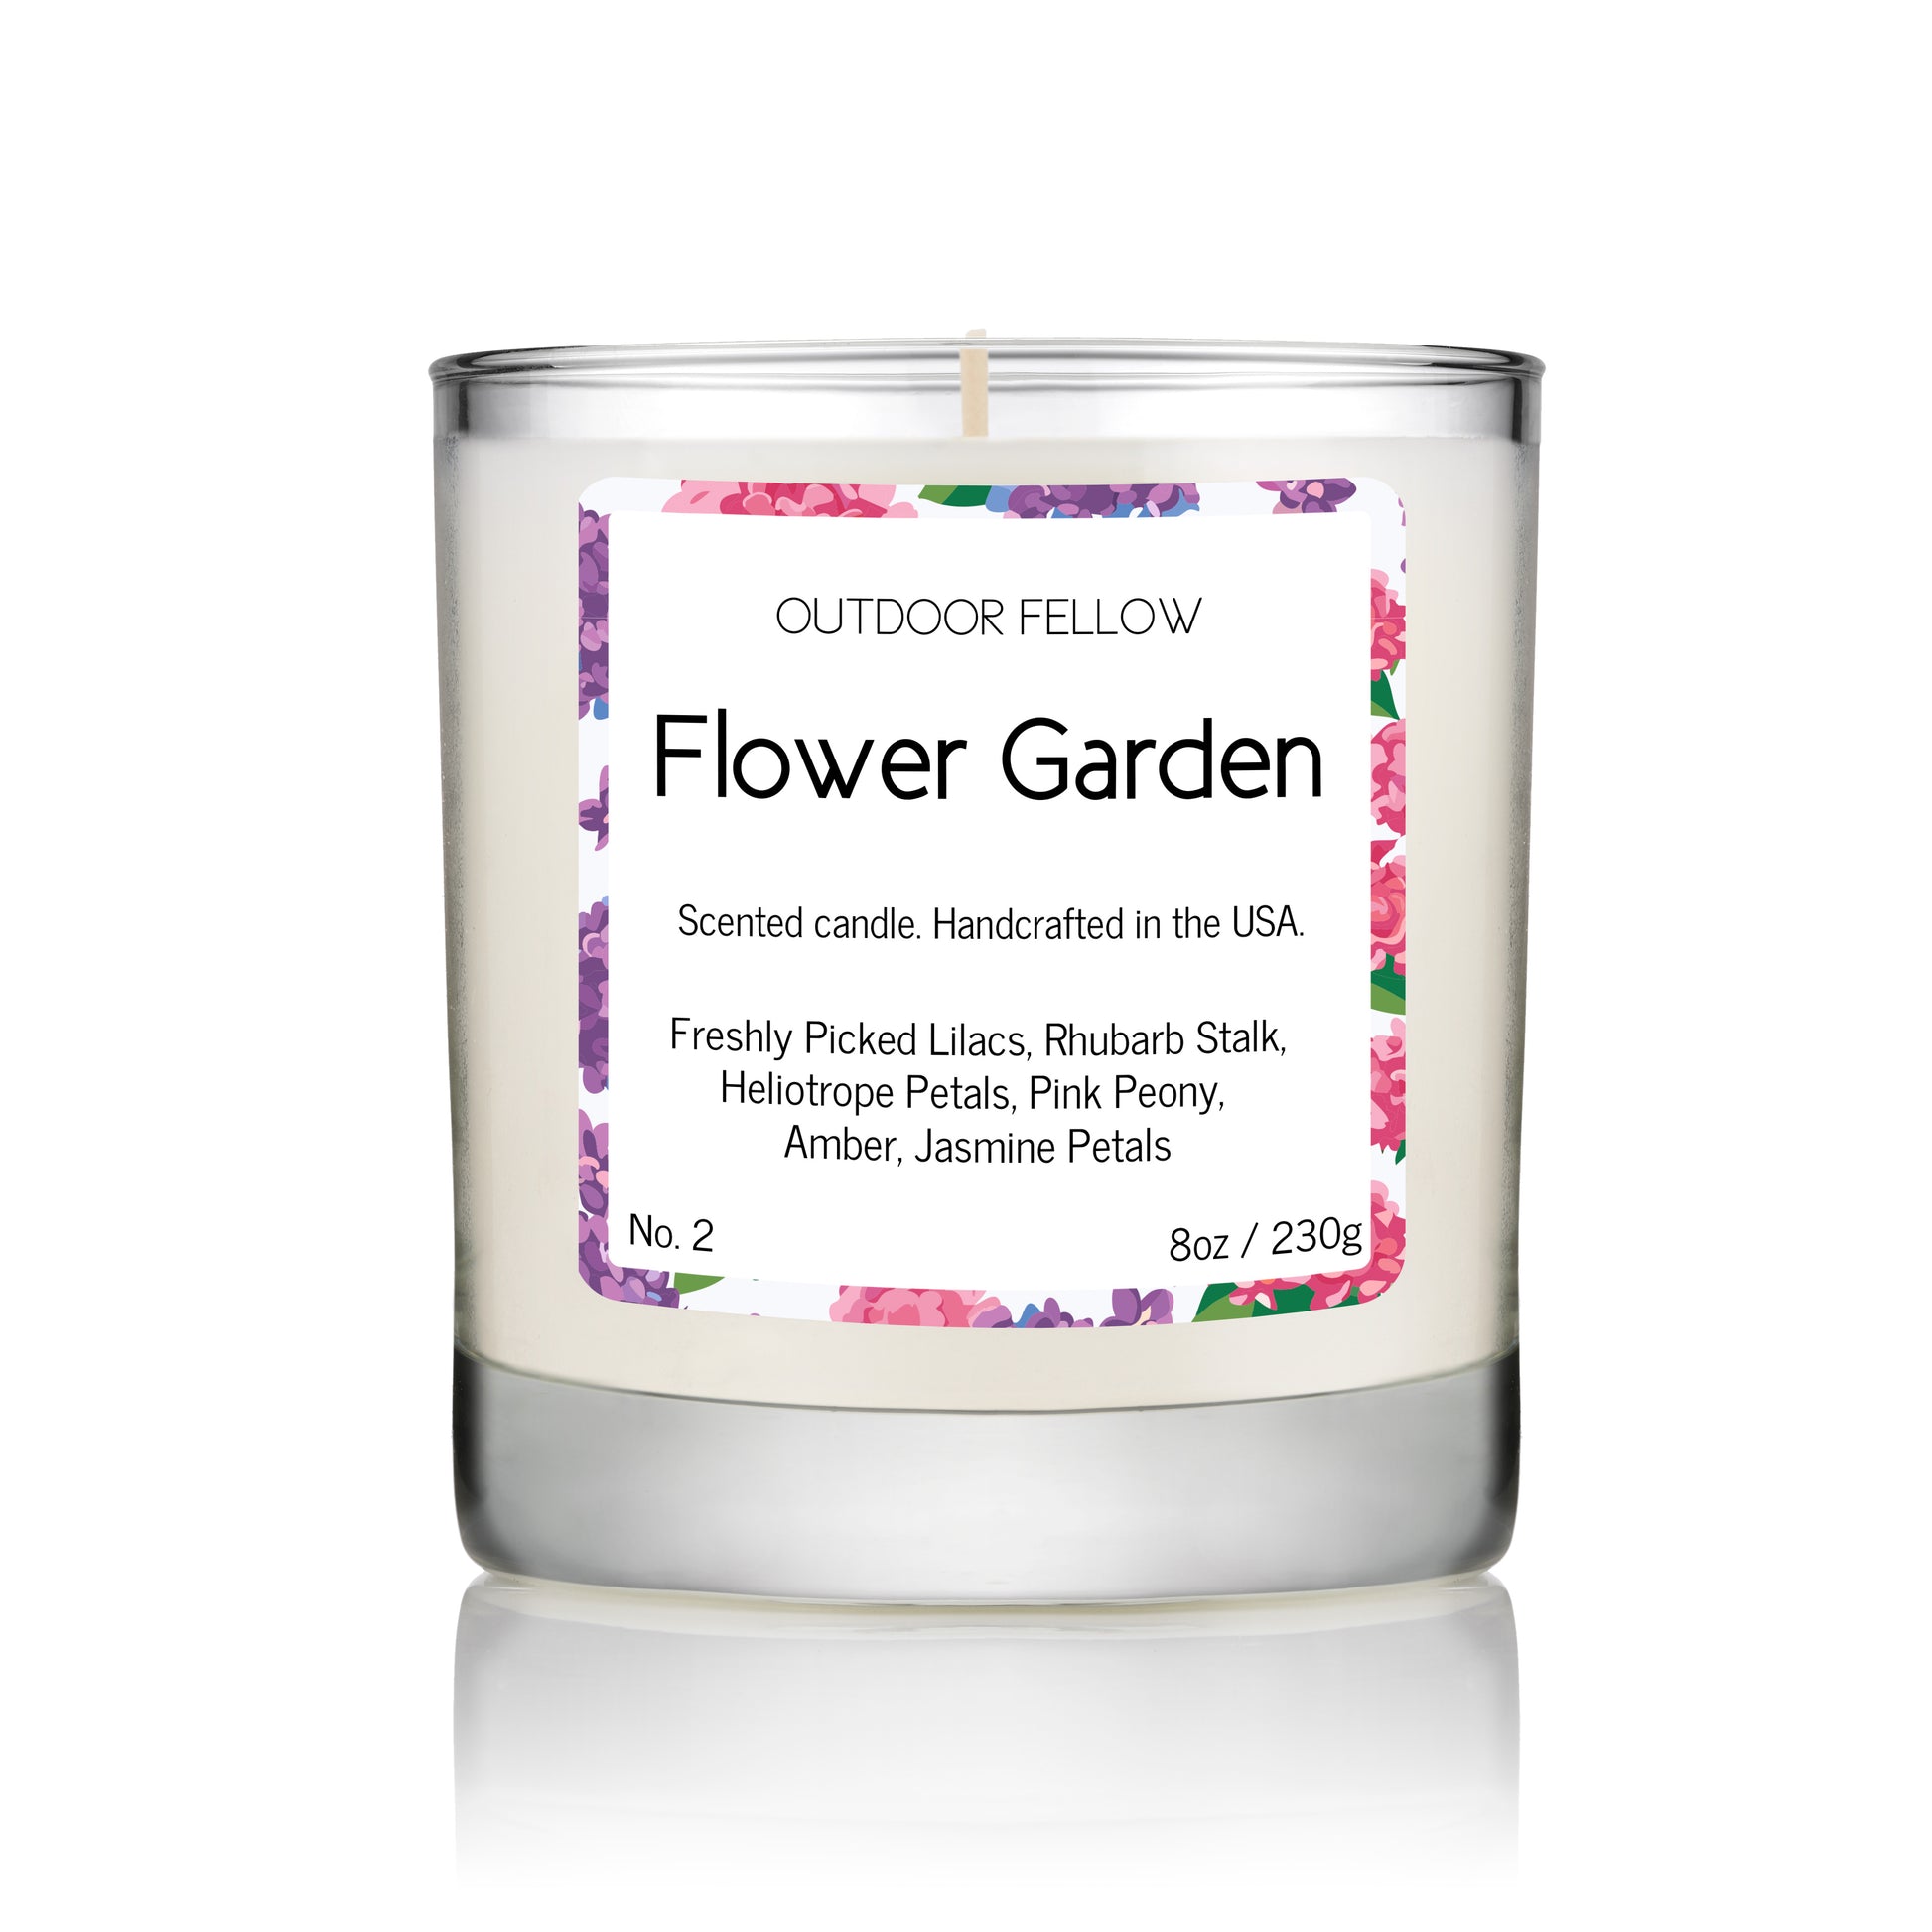 Flower Garden scented candle